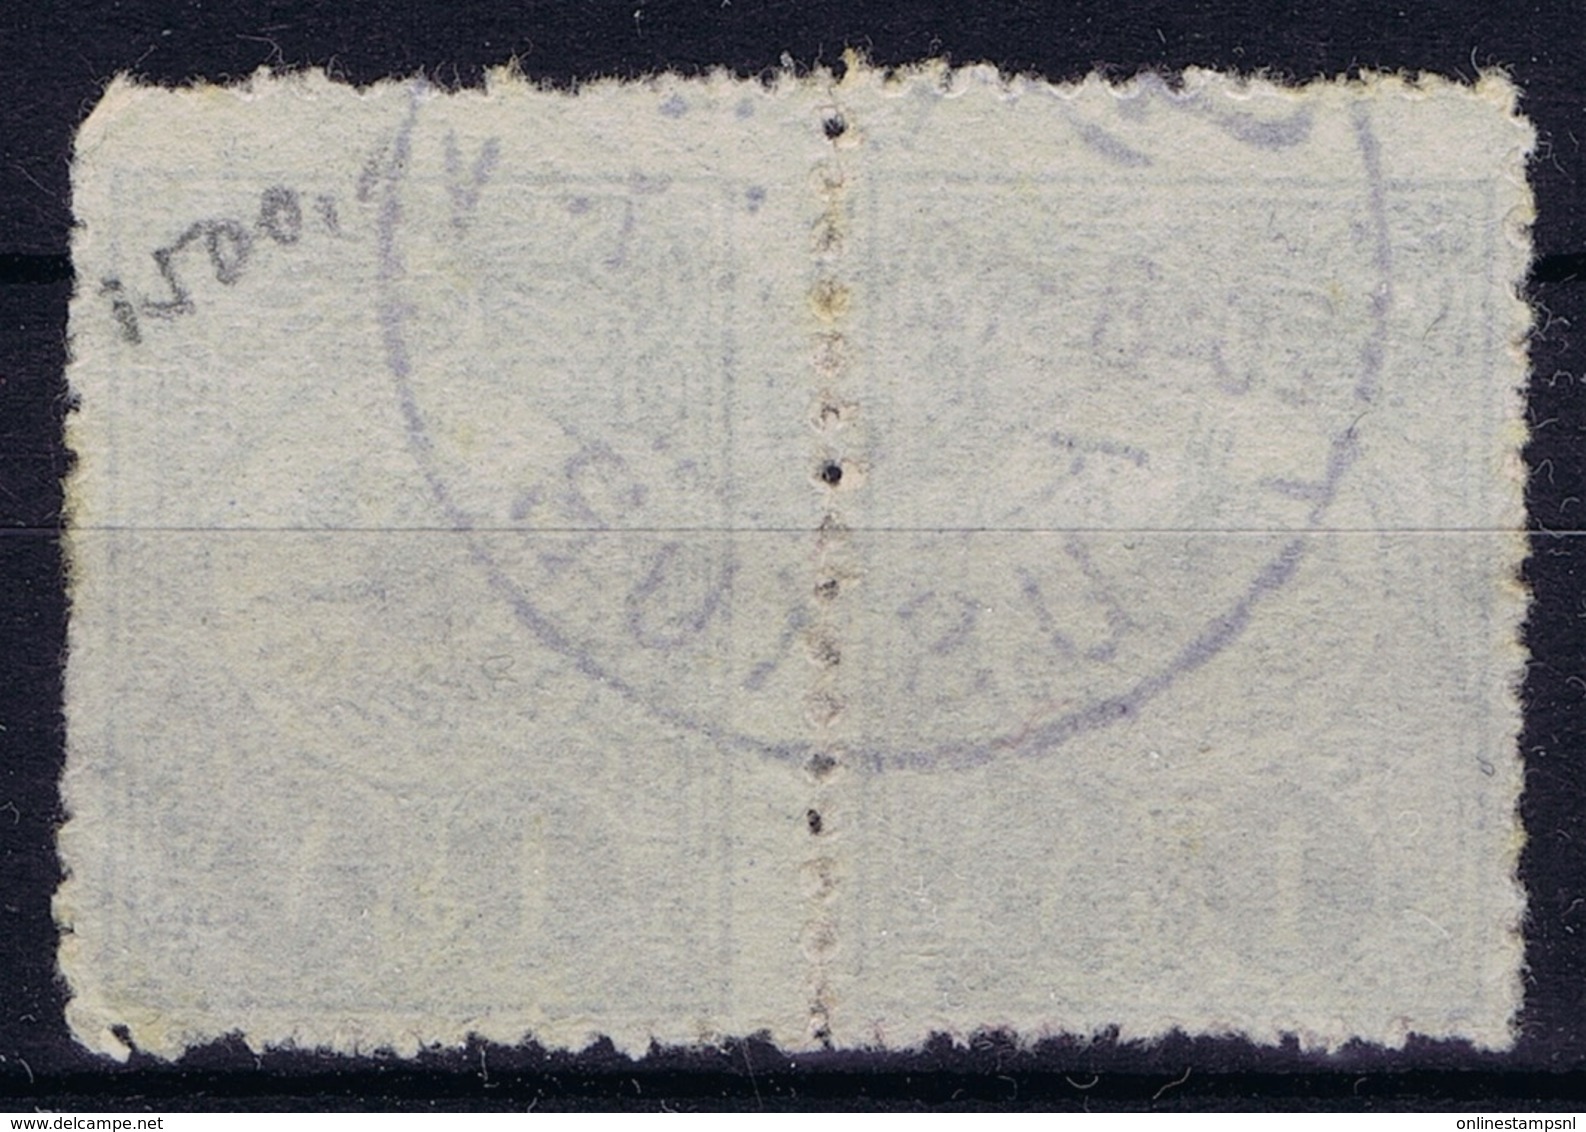 Ottoman Stamps With European CanceL  USKUB  SKOPJE NORTH MACEDONIA Signiert /signed/ Signé - Gebraucht